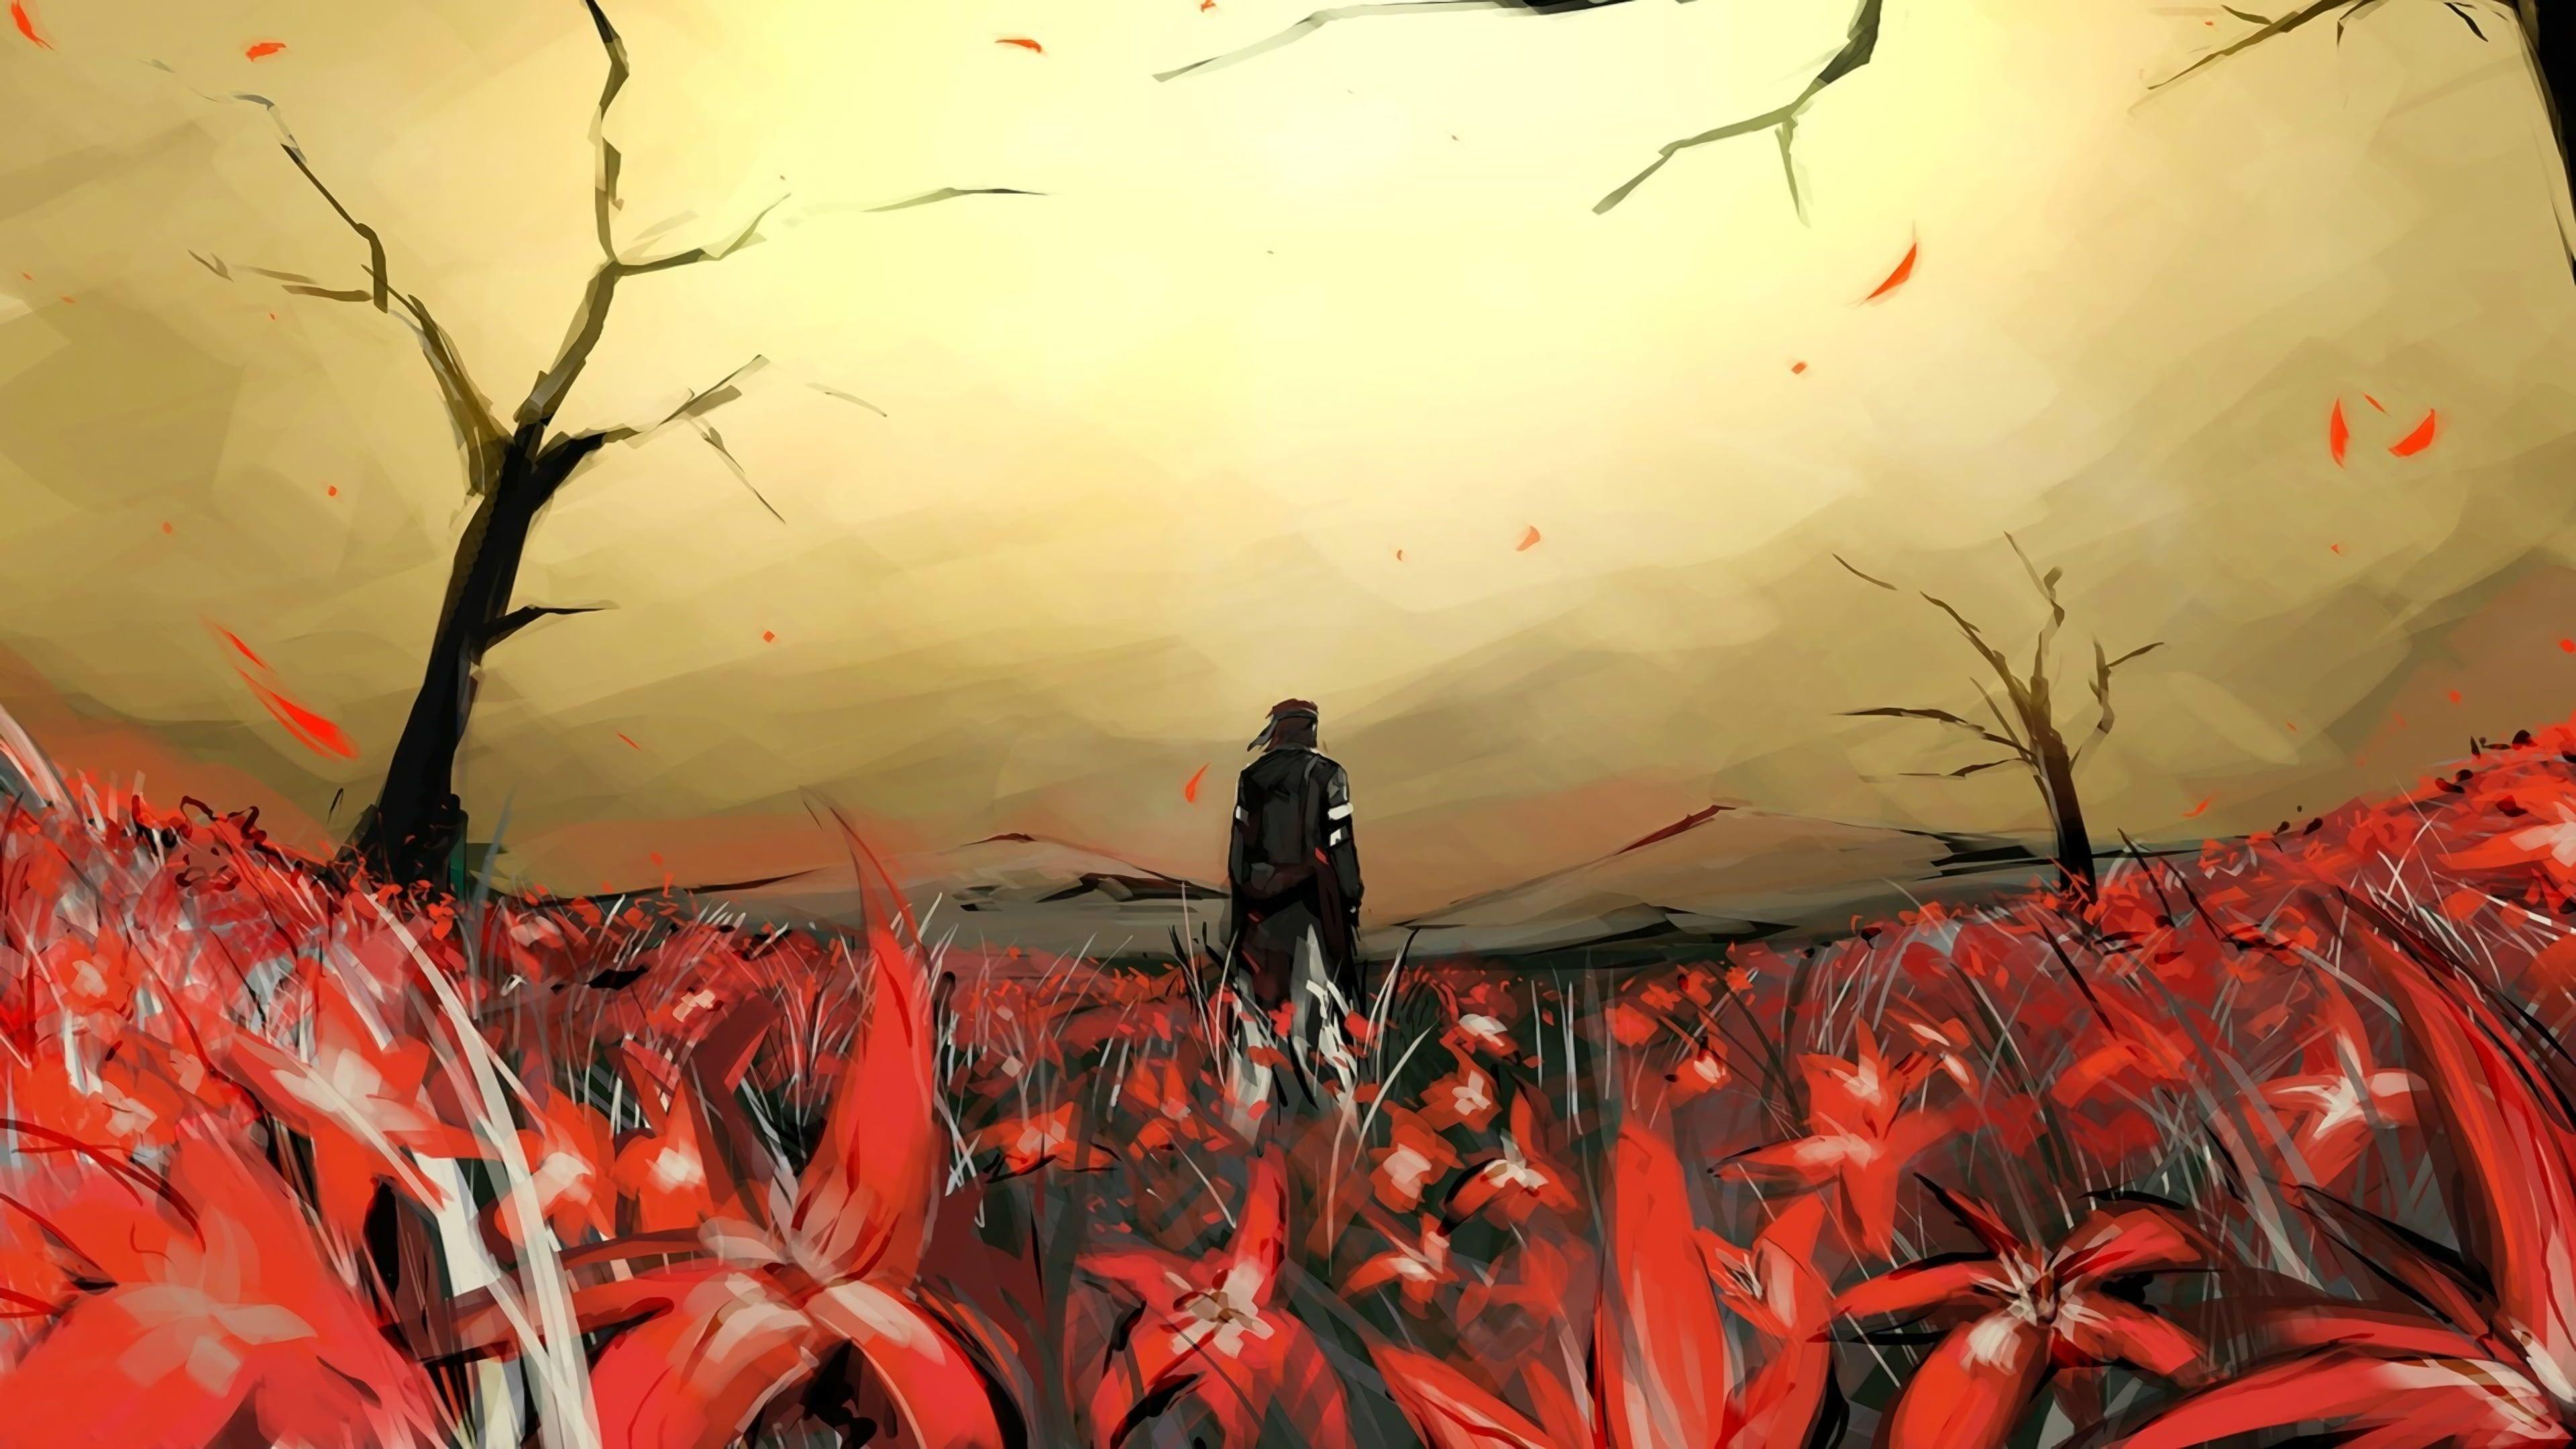 Anime character standing on red flower field illustration, Metal